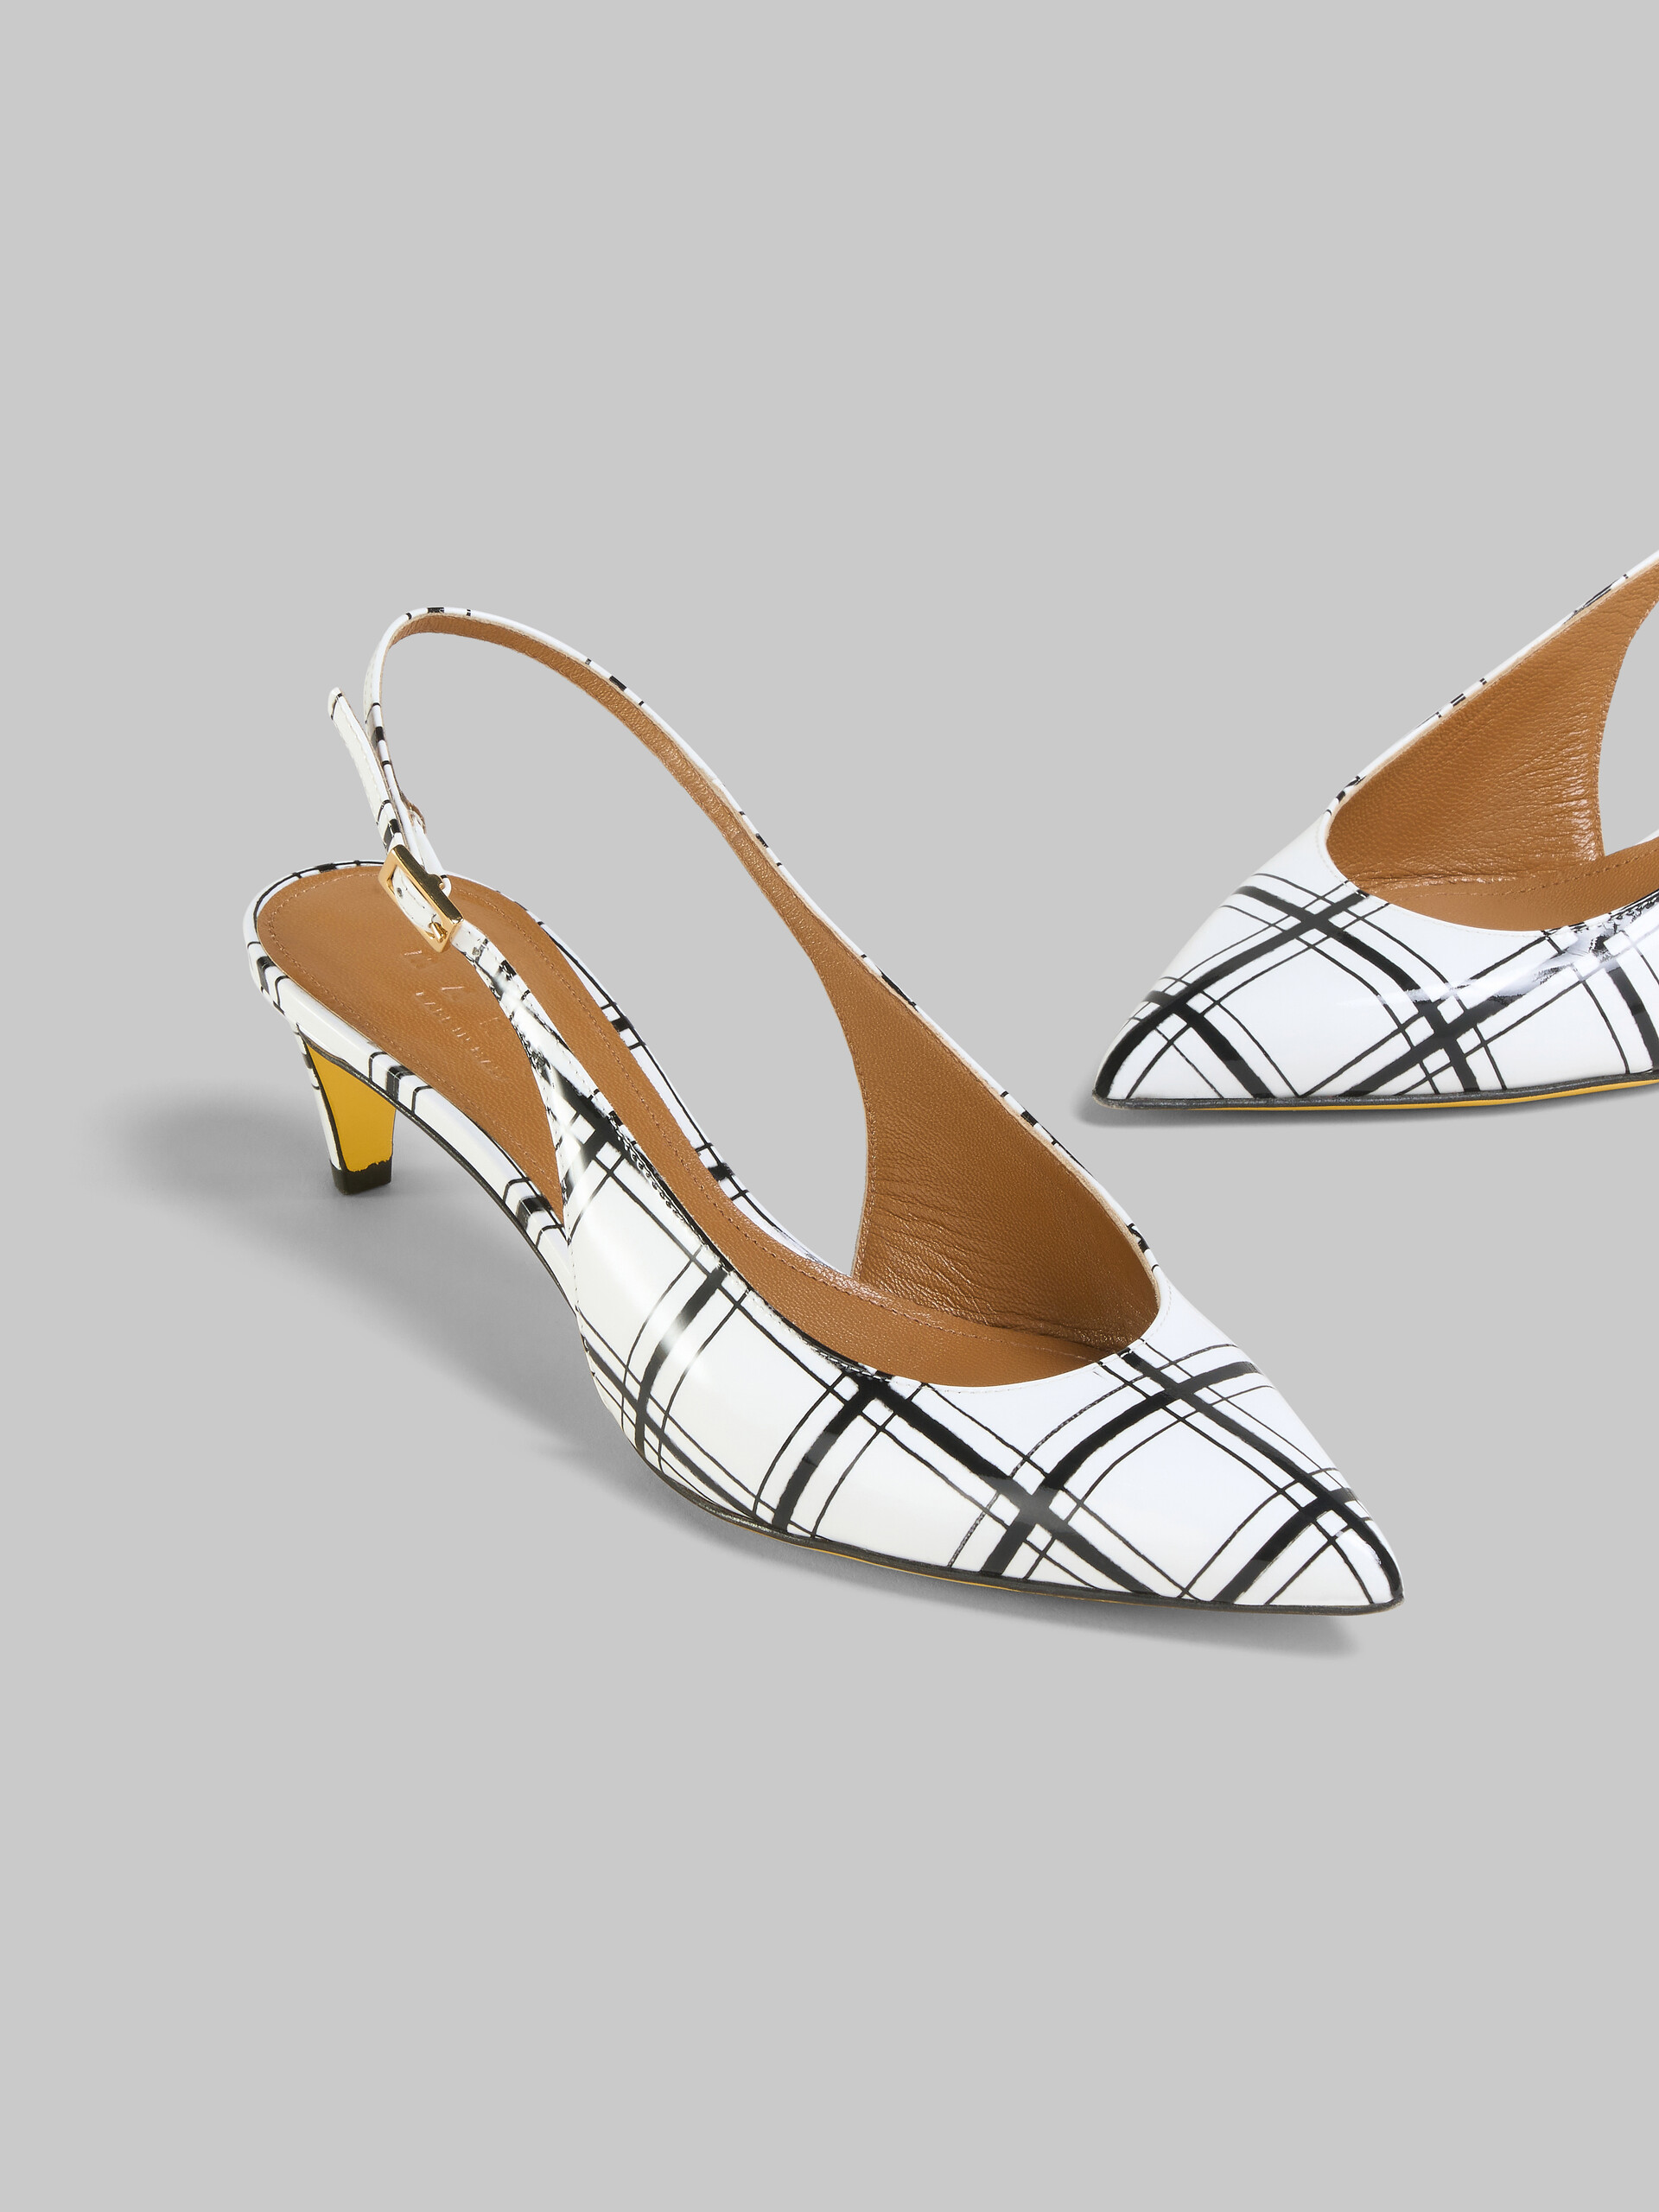 White and black checked patent leather Rhythm slingback - Sandals - Image 5